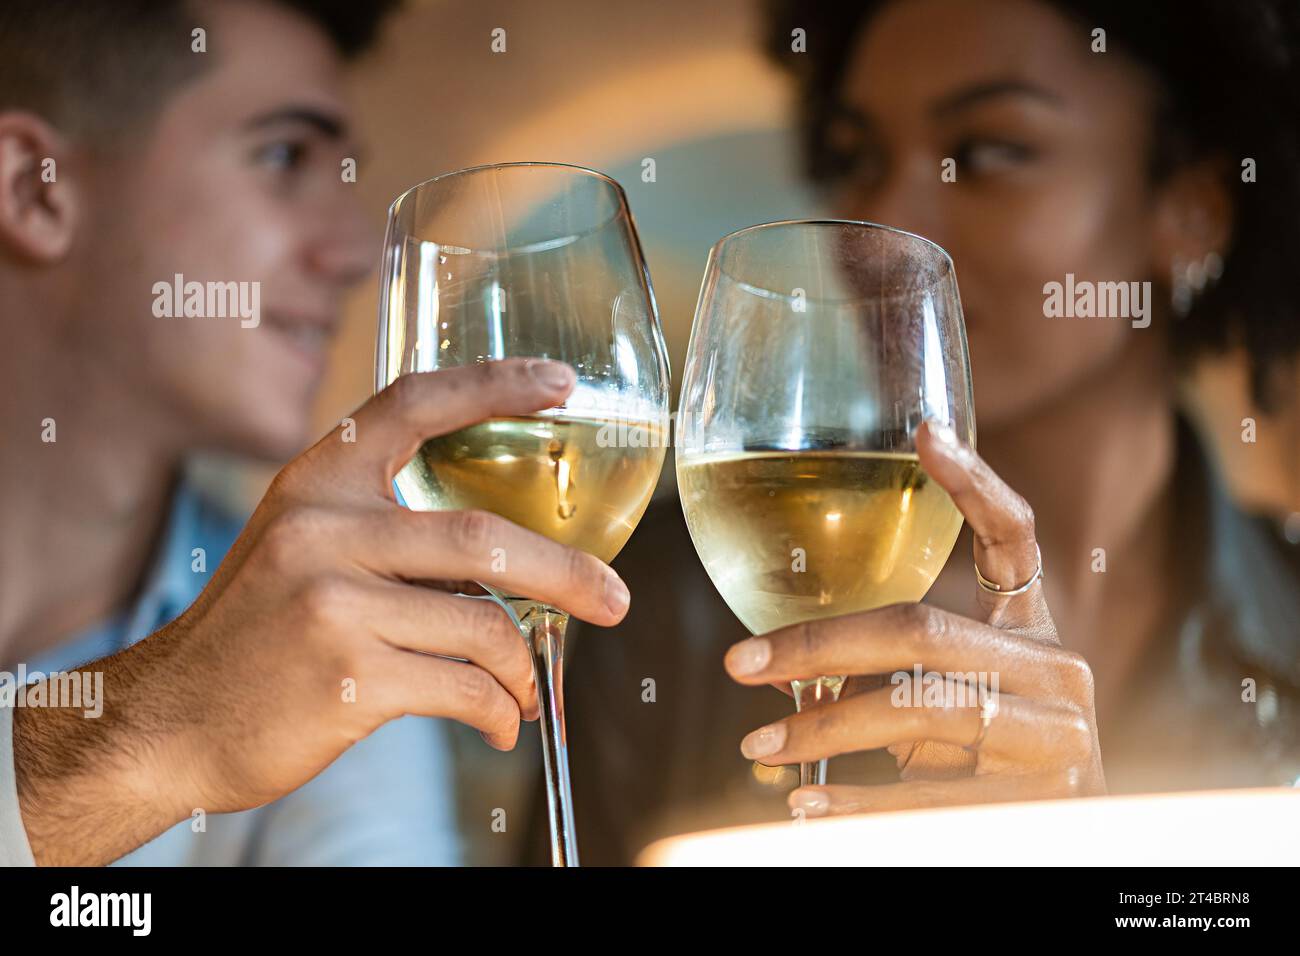 An intimate close-up of a young man and woman toasting with glasses of white wine. Their focused expressions and the clink of glasses symbolize celebr Stock Photo